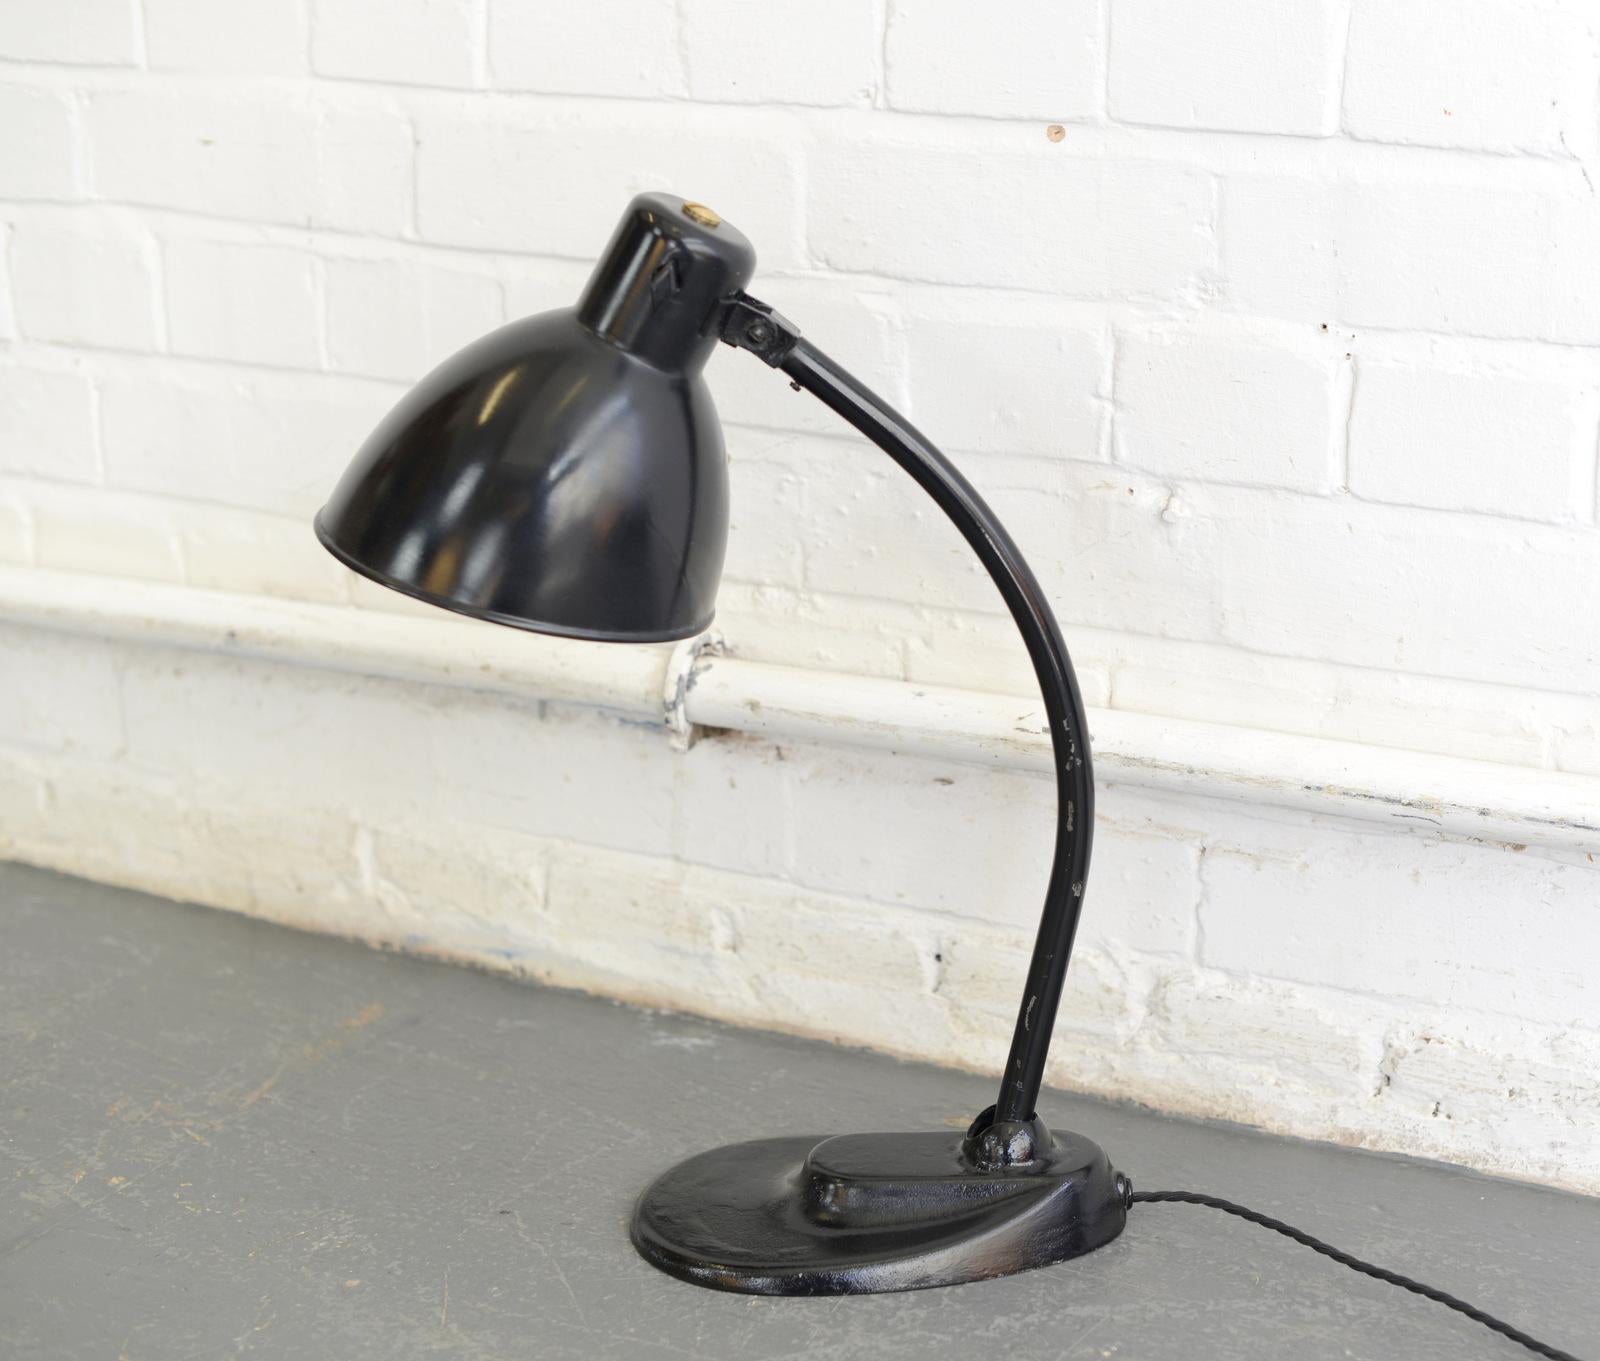 Marianne Brandt Kandem desk lamp, circa 1920s.

- Cast iron base
- Angled steel shade
- Articulated arm and shade
- Original on/off switch
- Designed by Marianne Brandt for Kandem
- German, 1920s
- Measures: 49 cm tall x 14 cm wide x 22 cm